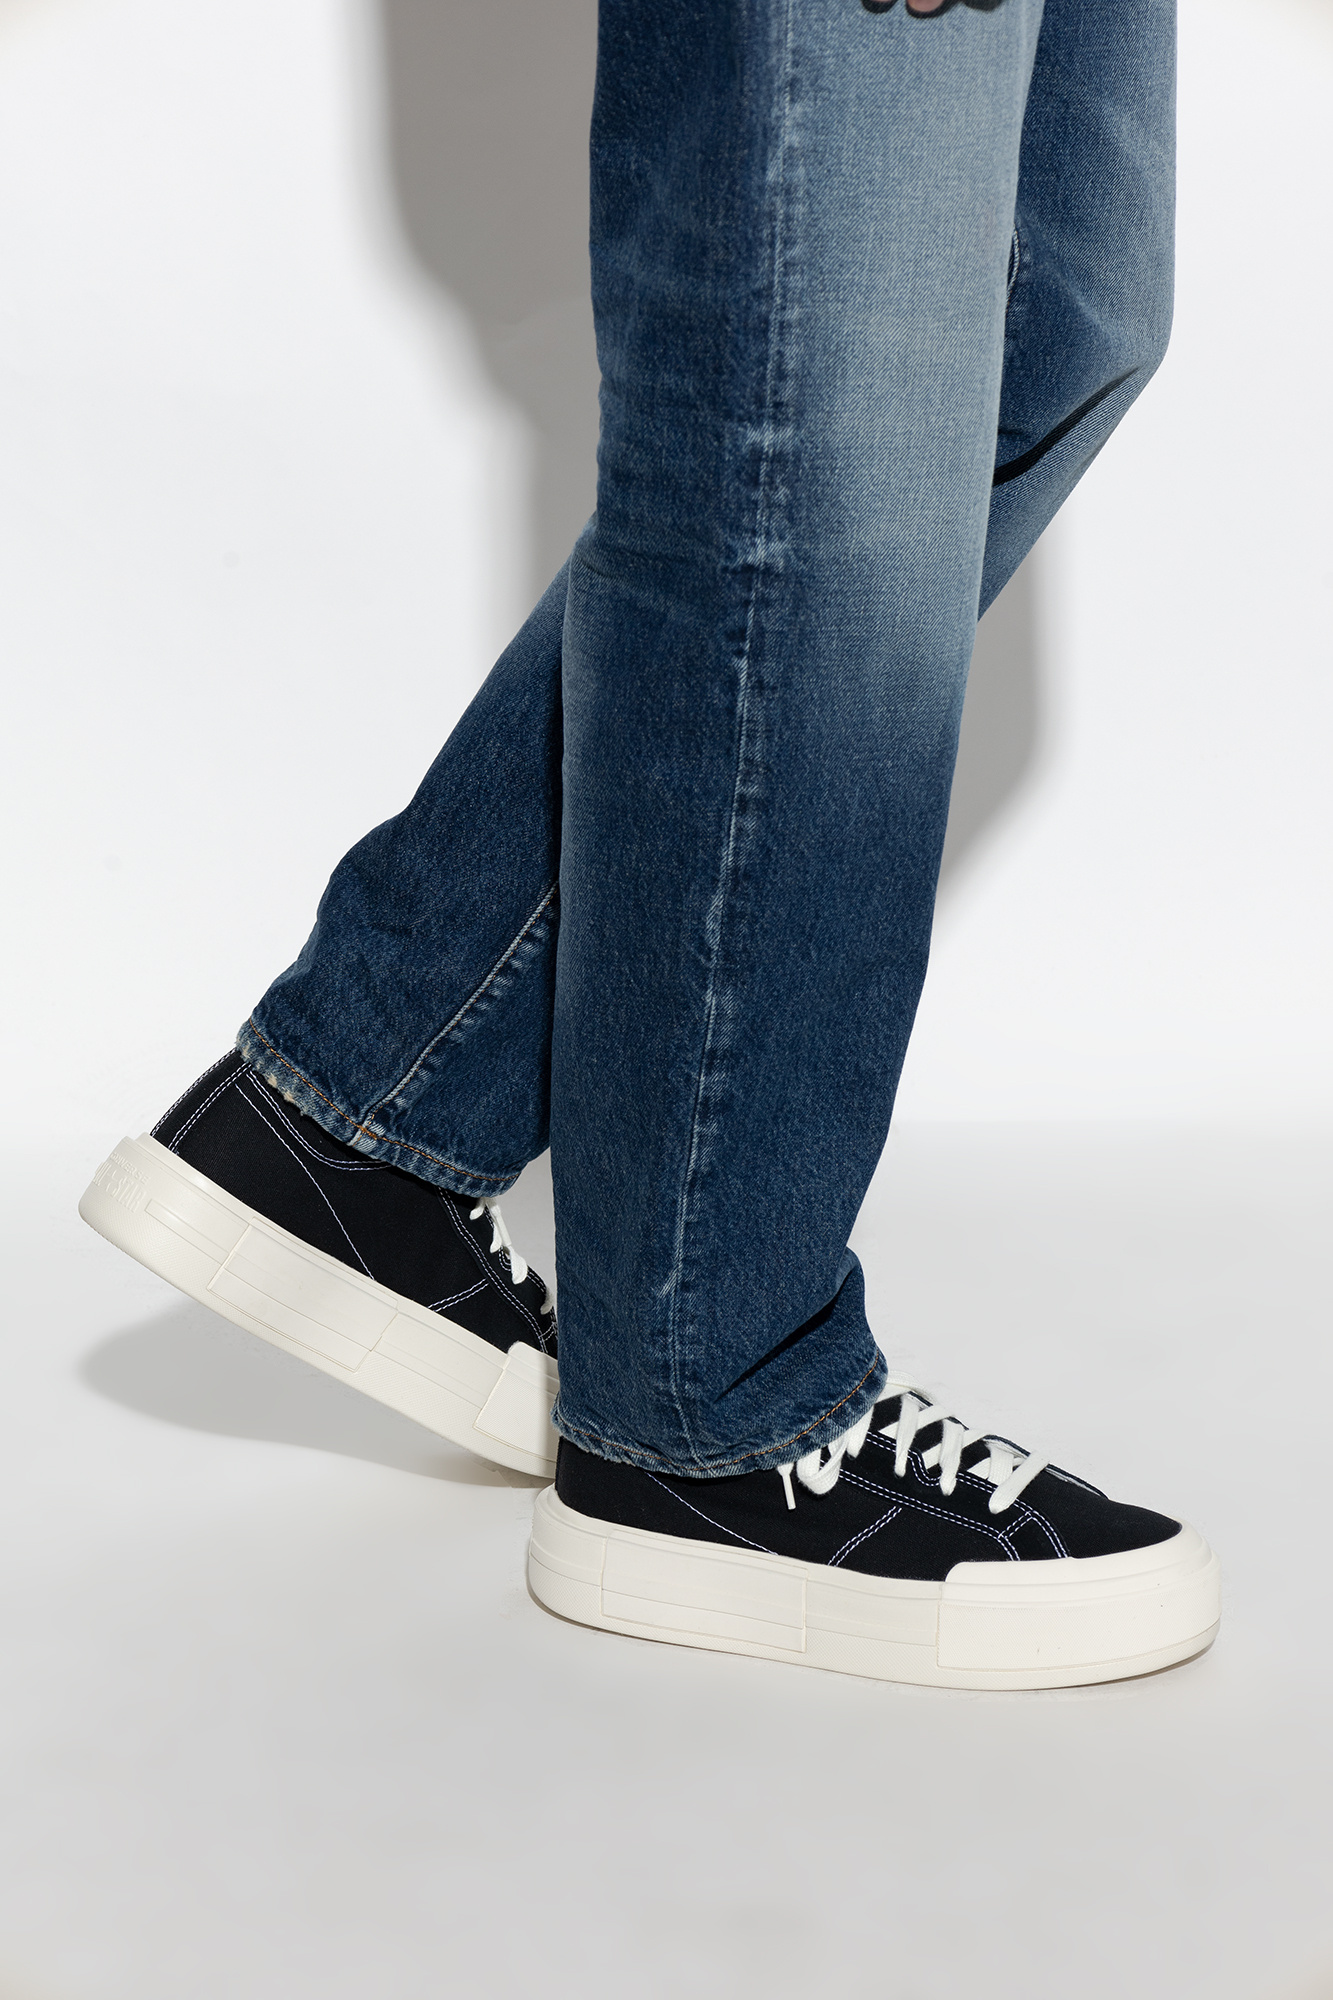 Converse ‘Chuck Taylor All Star Cruise High’ sneakers | Men's Shoes ...